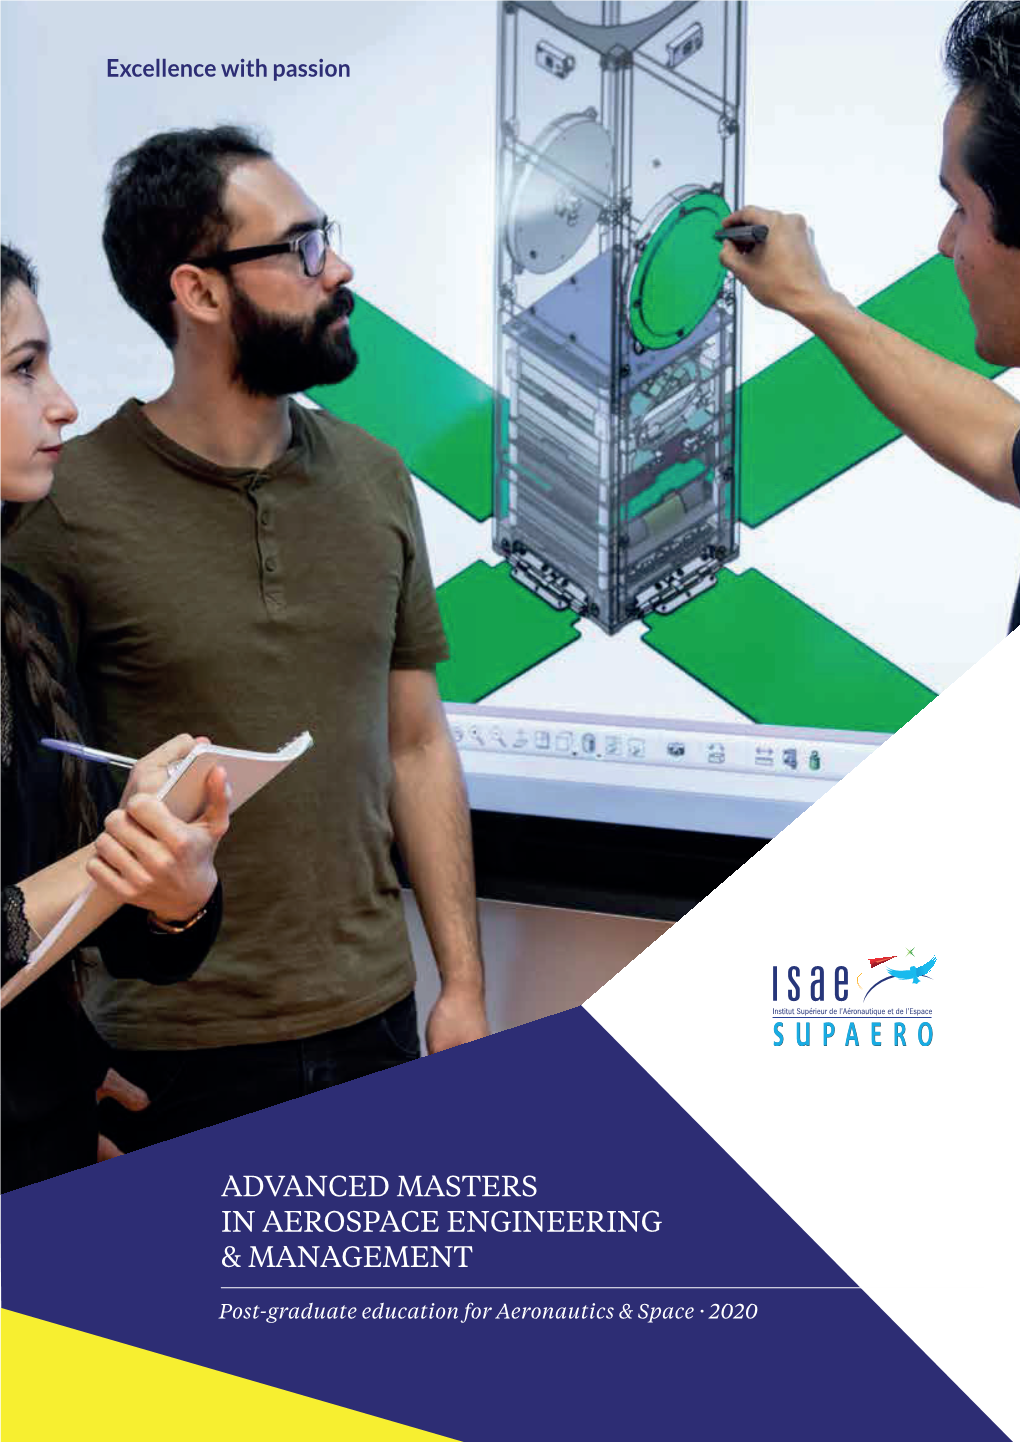 Advanced Masters in Aerospace Engineering & Management